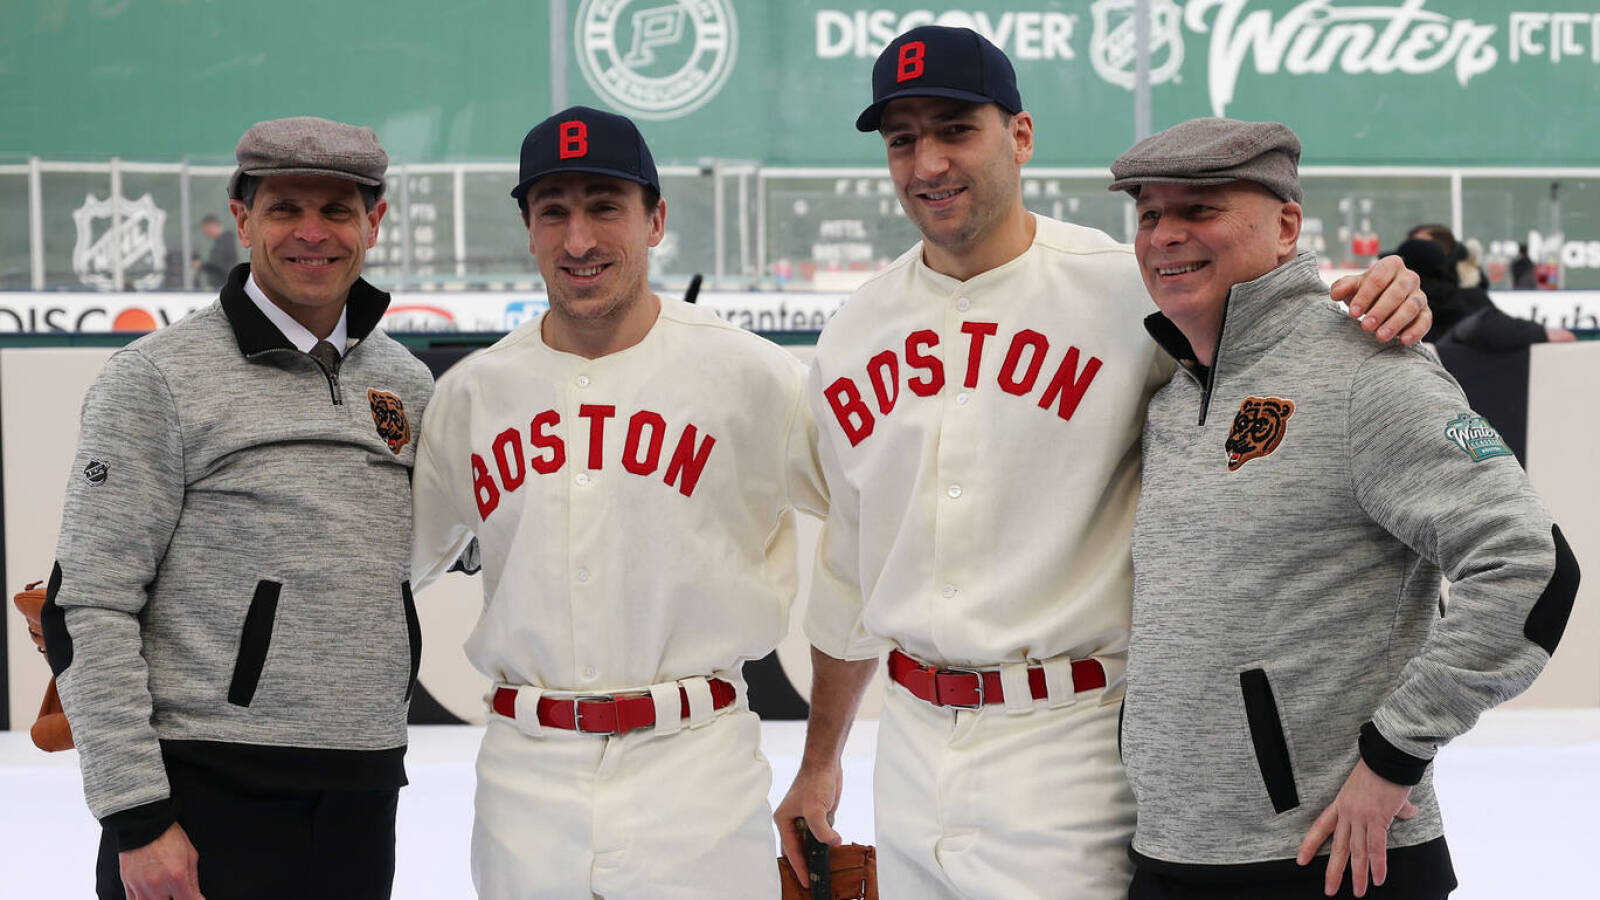 Bruins – Penguins: Boston dresses as Red Sox before Winter Classic